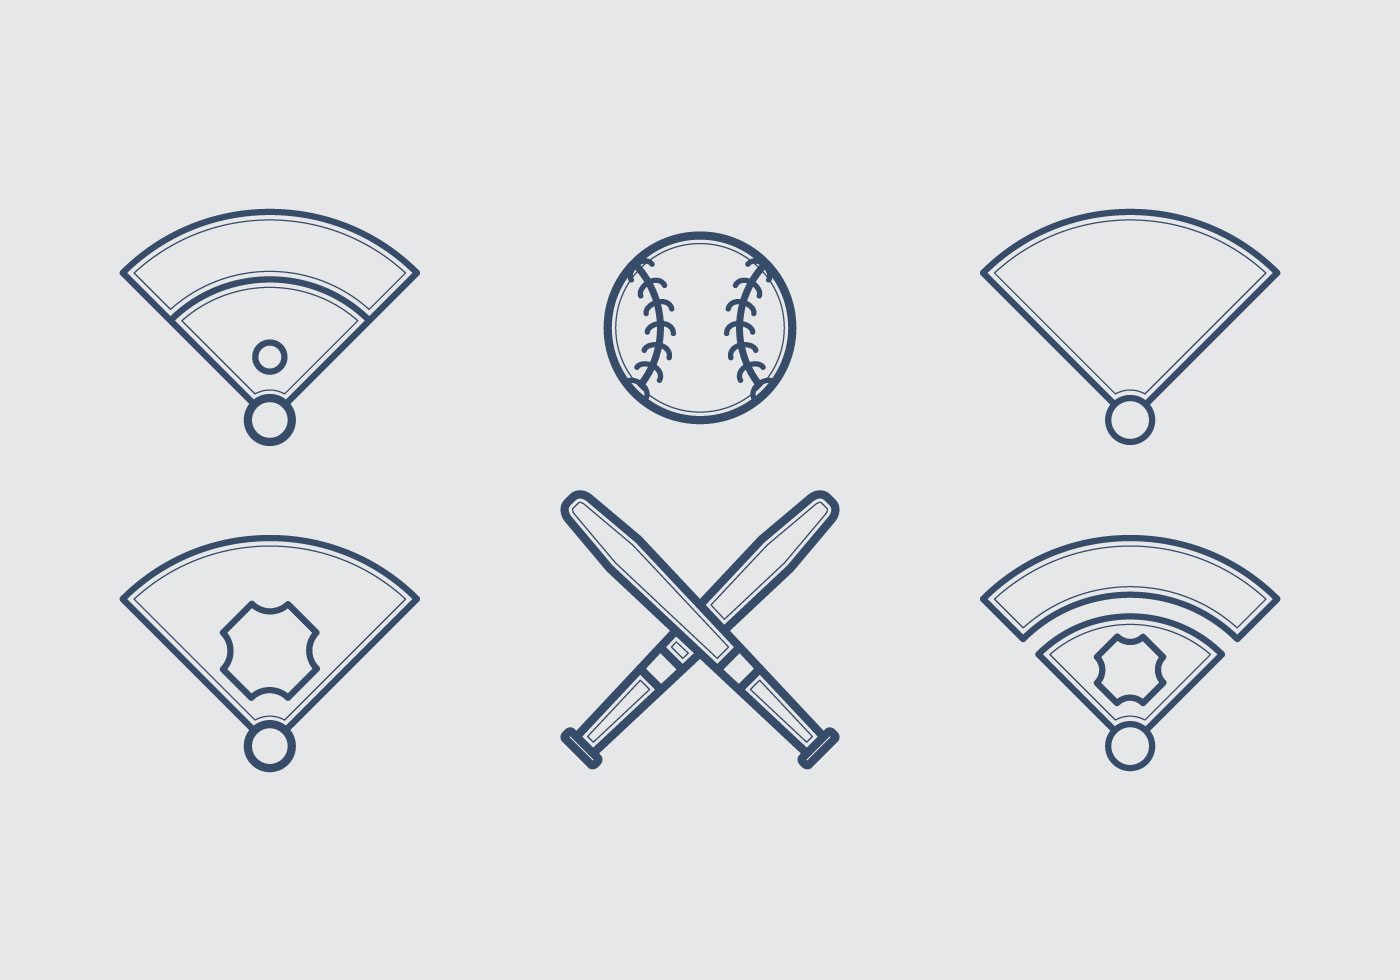 Download the Free Baseball Vector Icon Illustrations #4 100914 royalty-free...